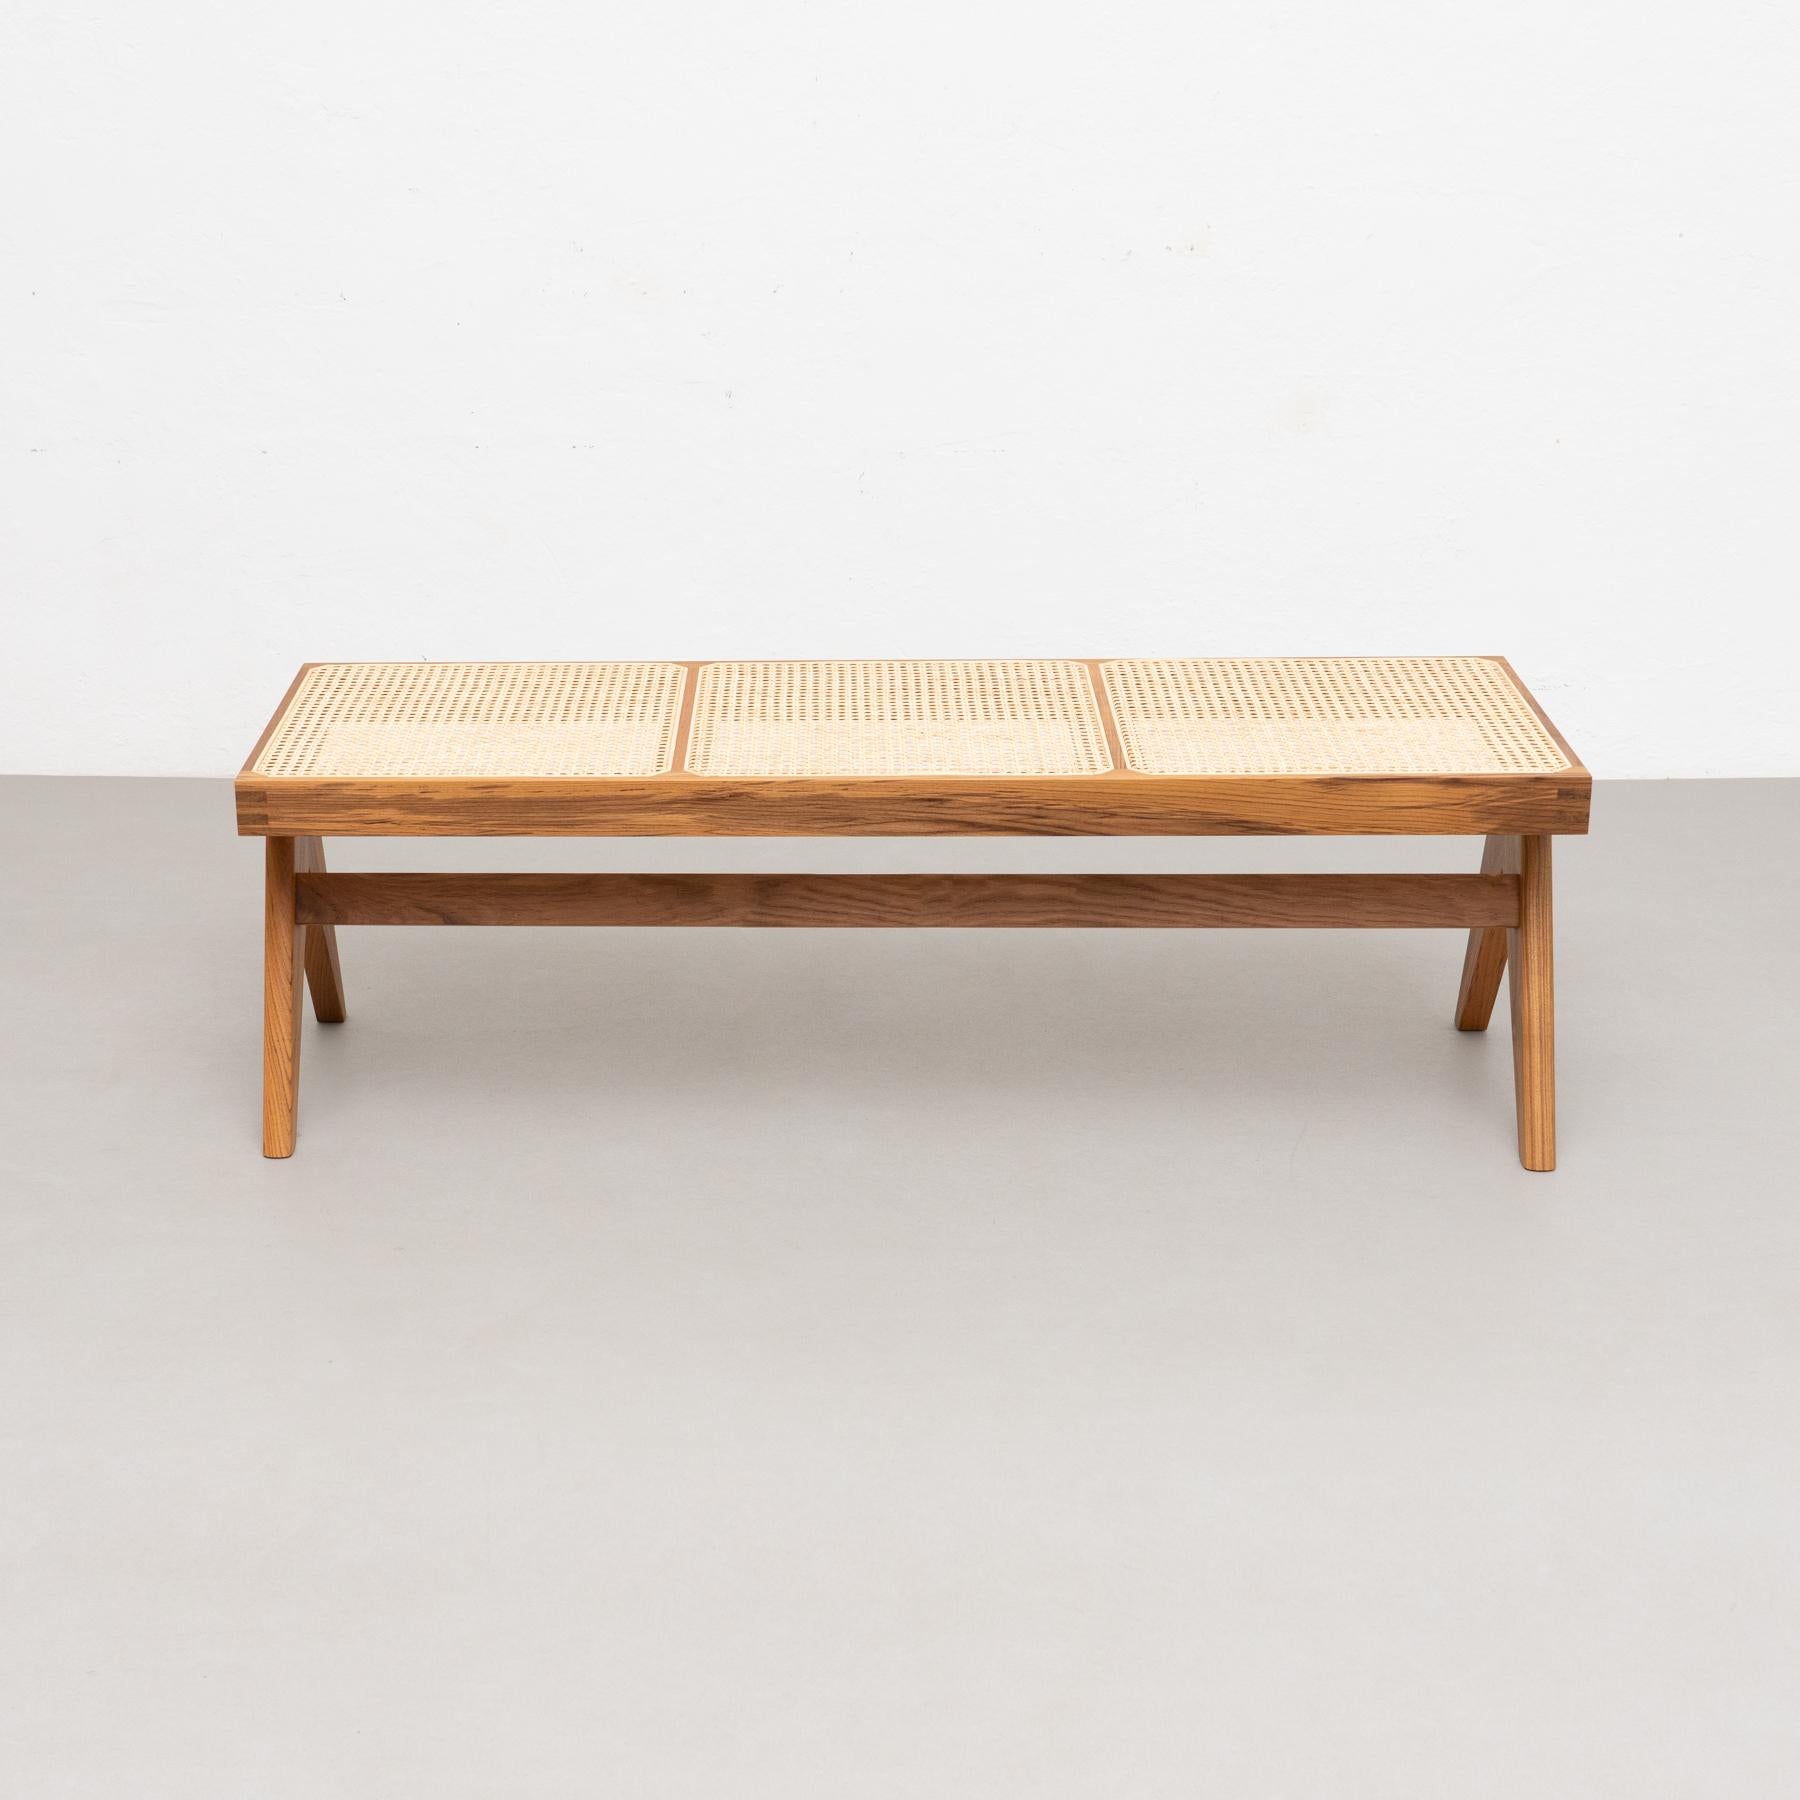 Italian Pierre Jeanneret 057 Civil Bench, Wood and Woven Viennese Cane